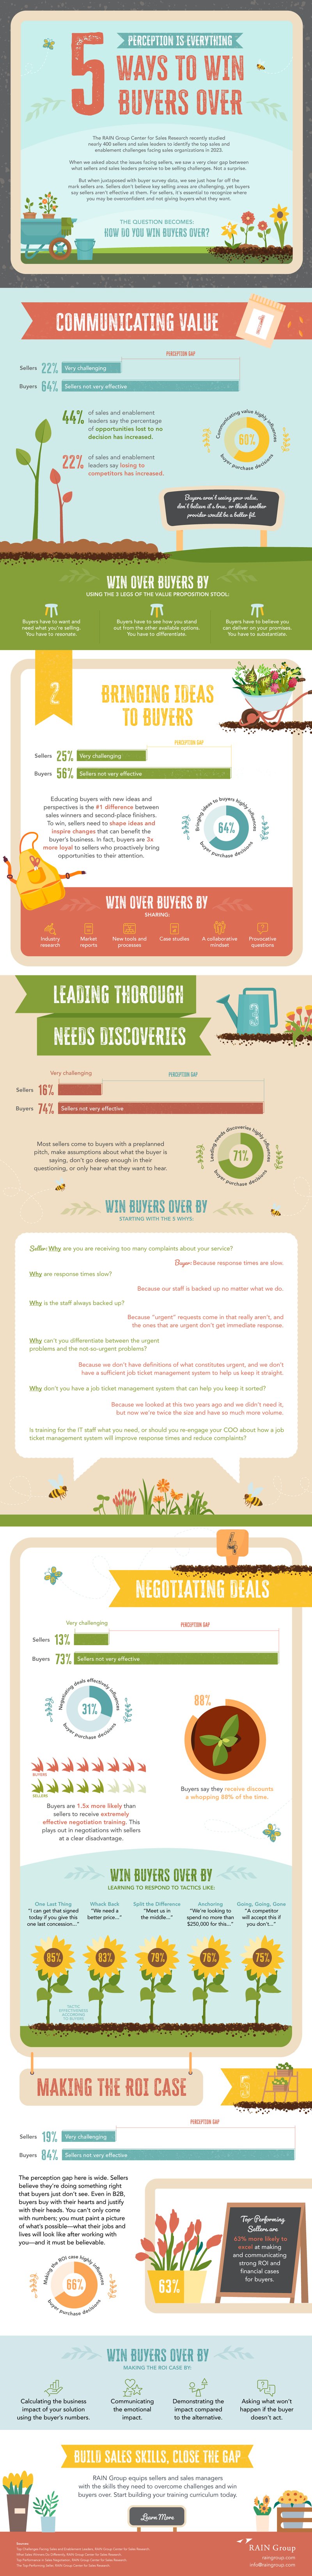 5_Ways_to_Win_Buyers_Over_Infographic